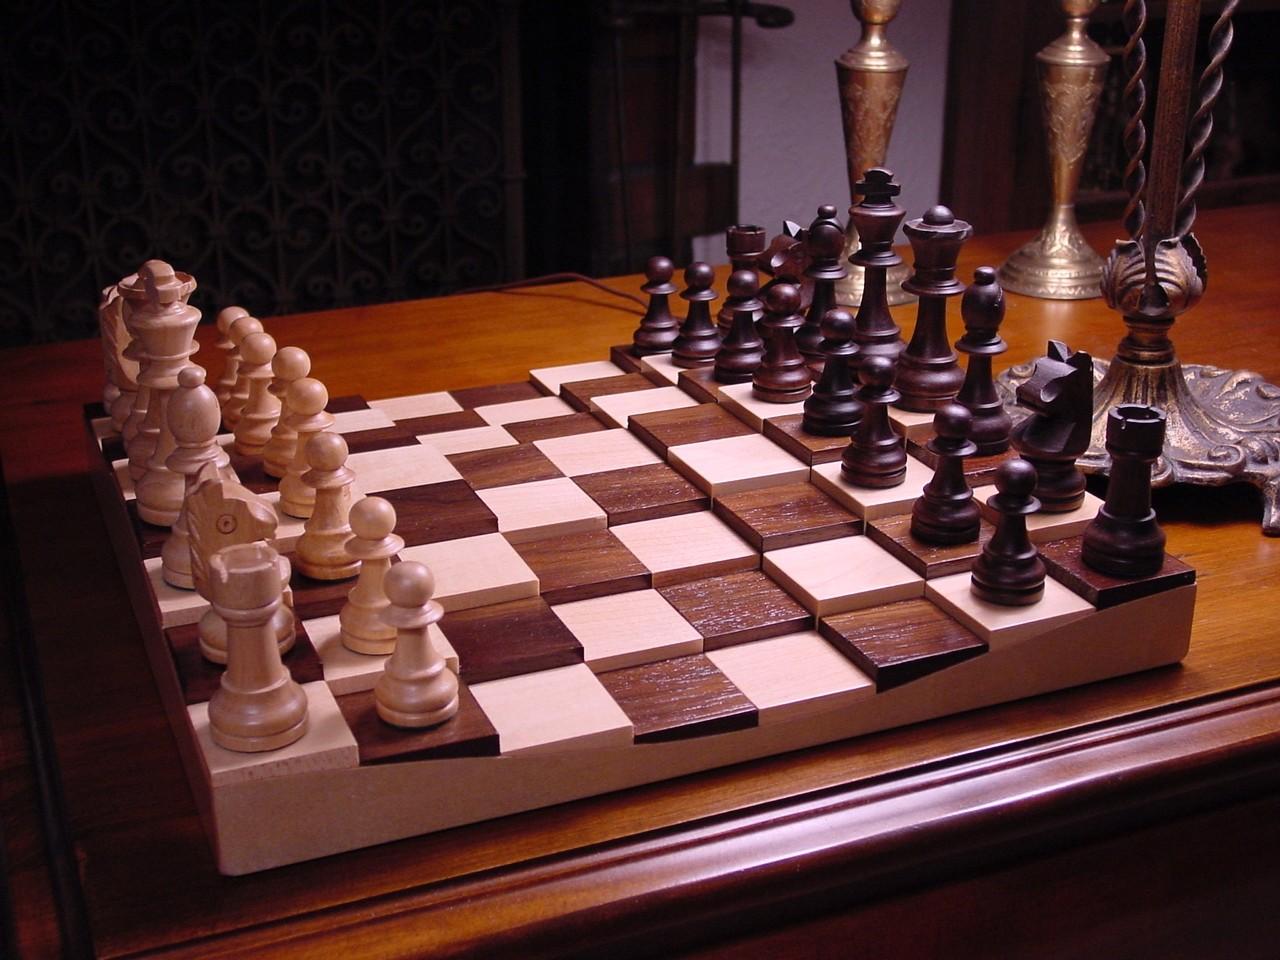 Board Games Check Mate Chessboards 3d Chess Checkmate